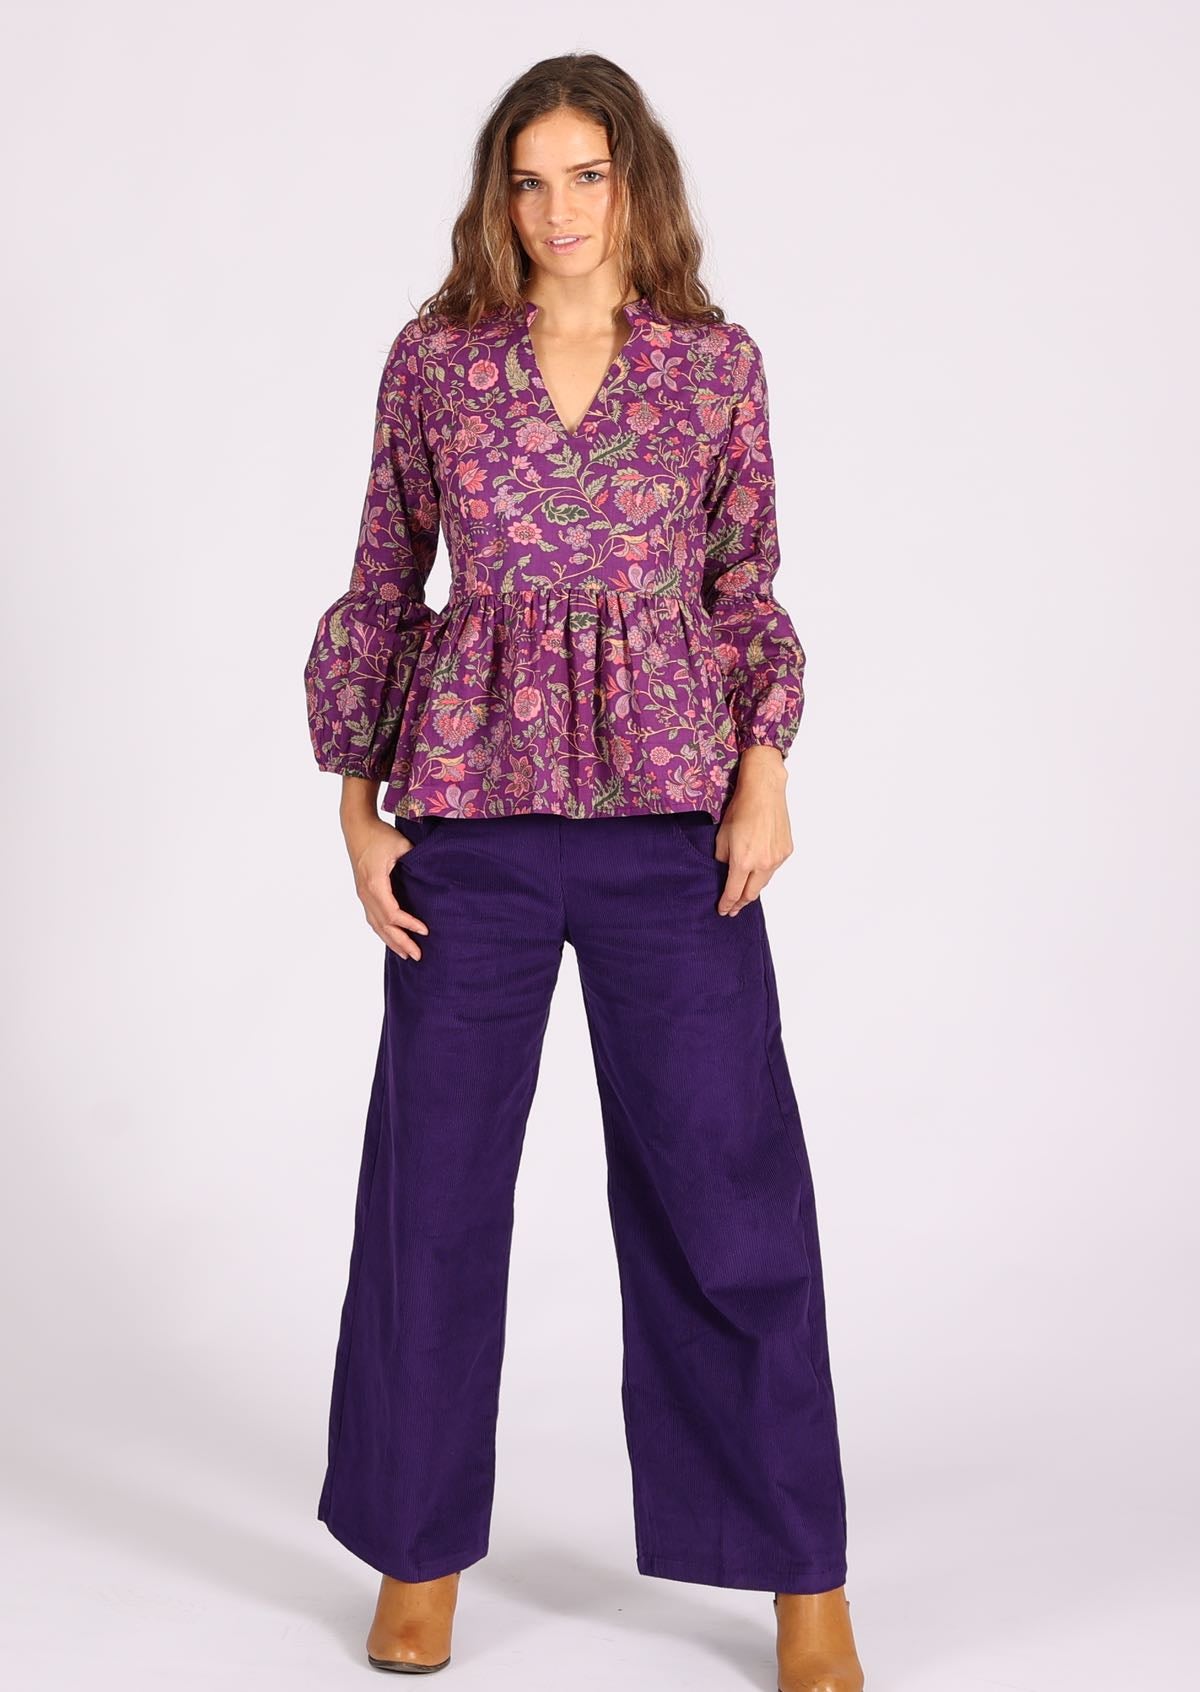 Cotton floral top with peplum flare reflected in the puffed sleeves